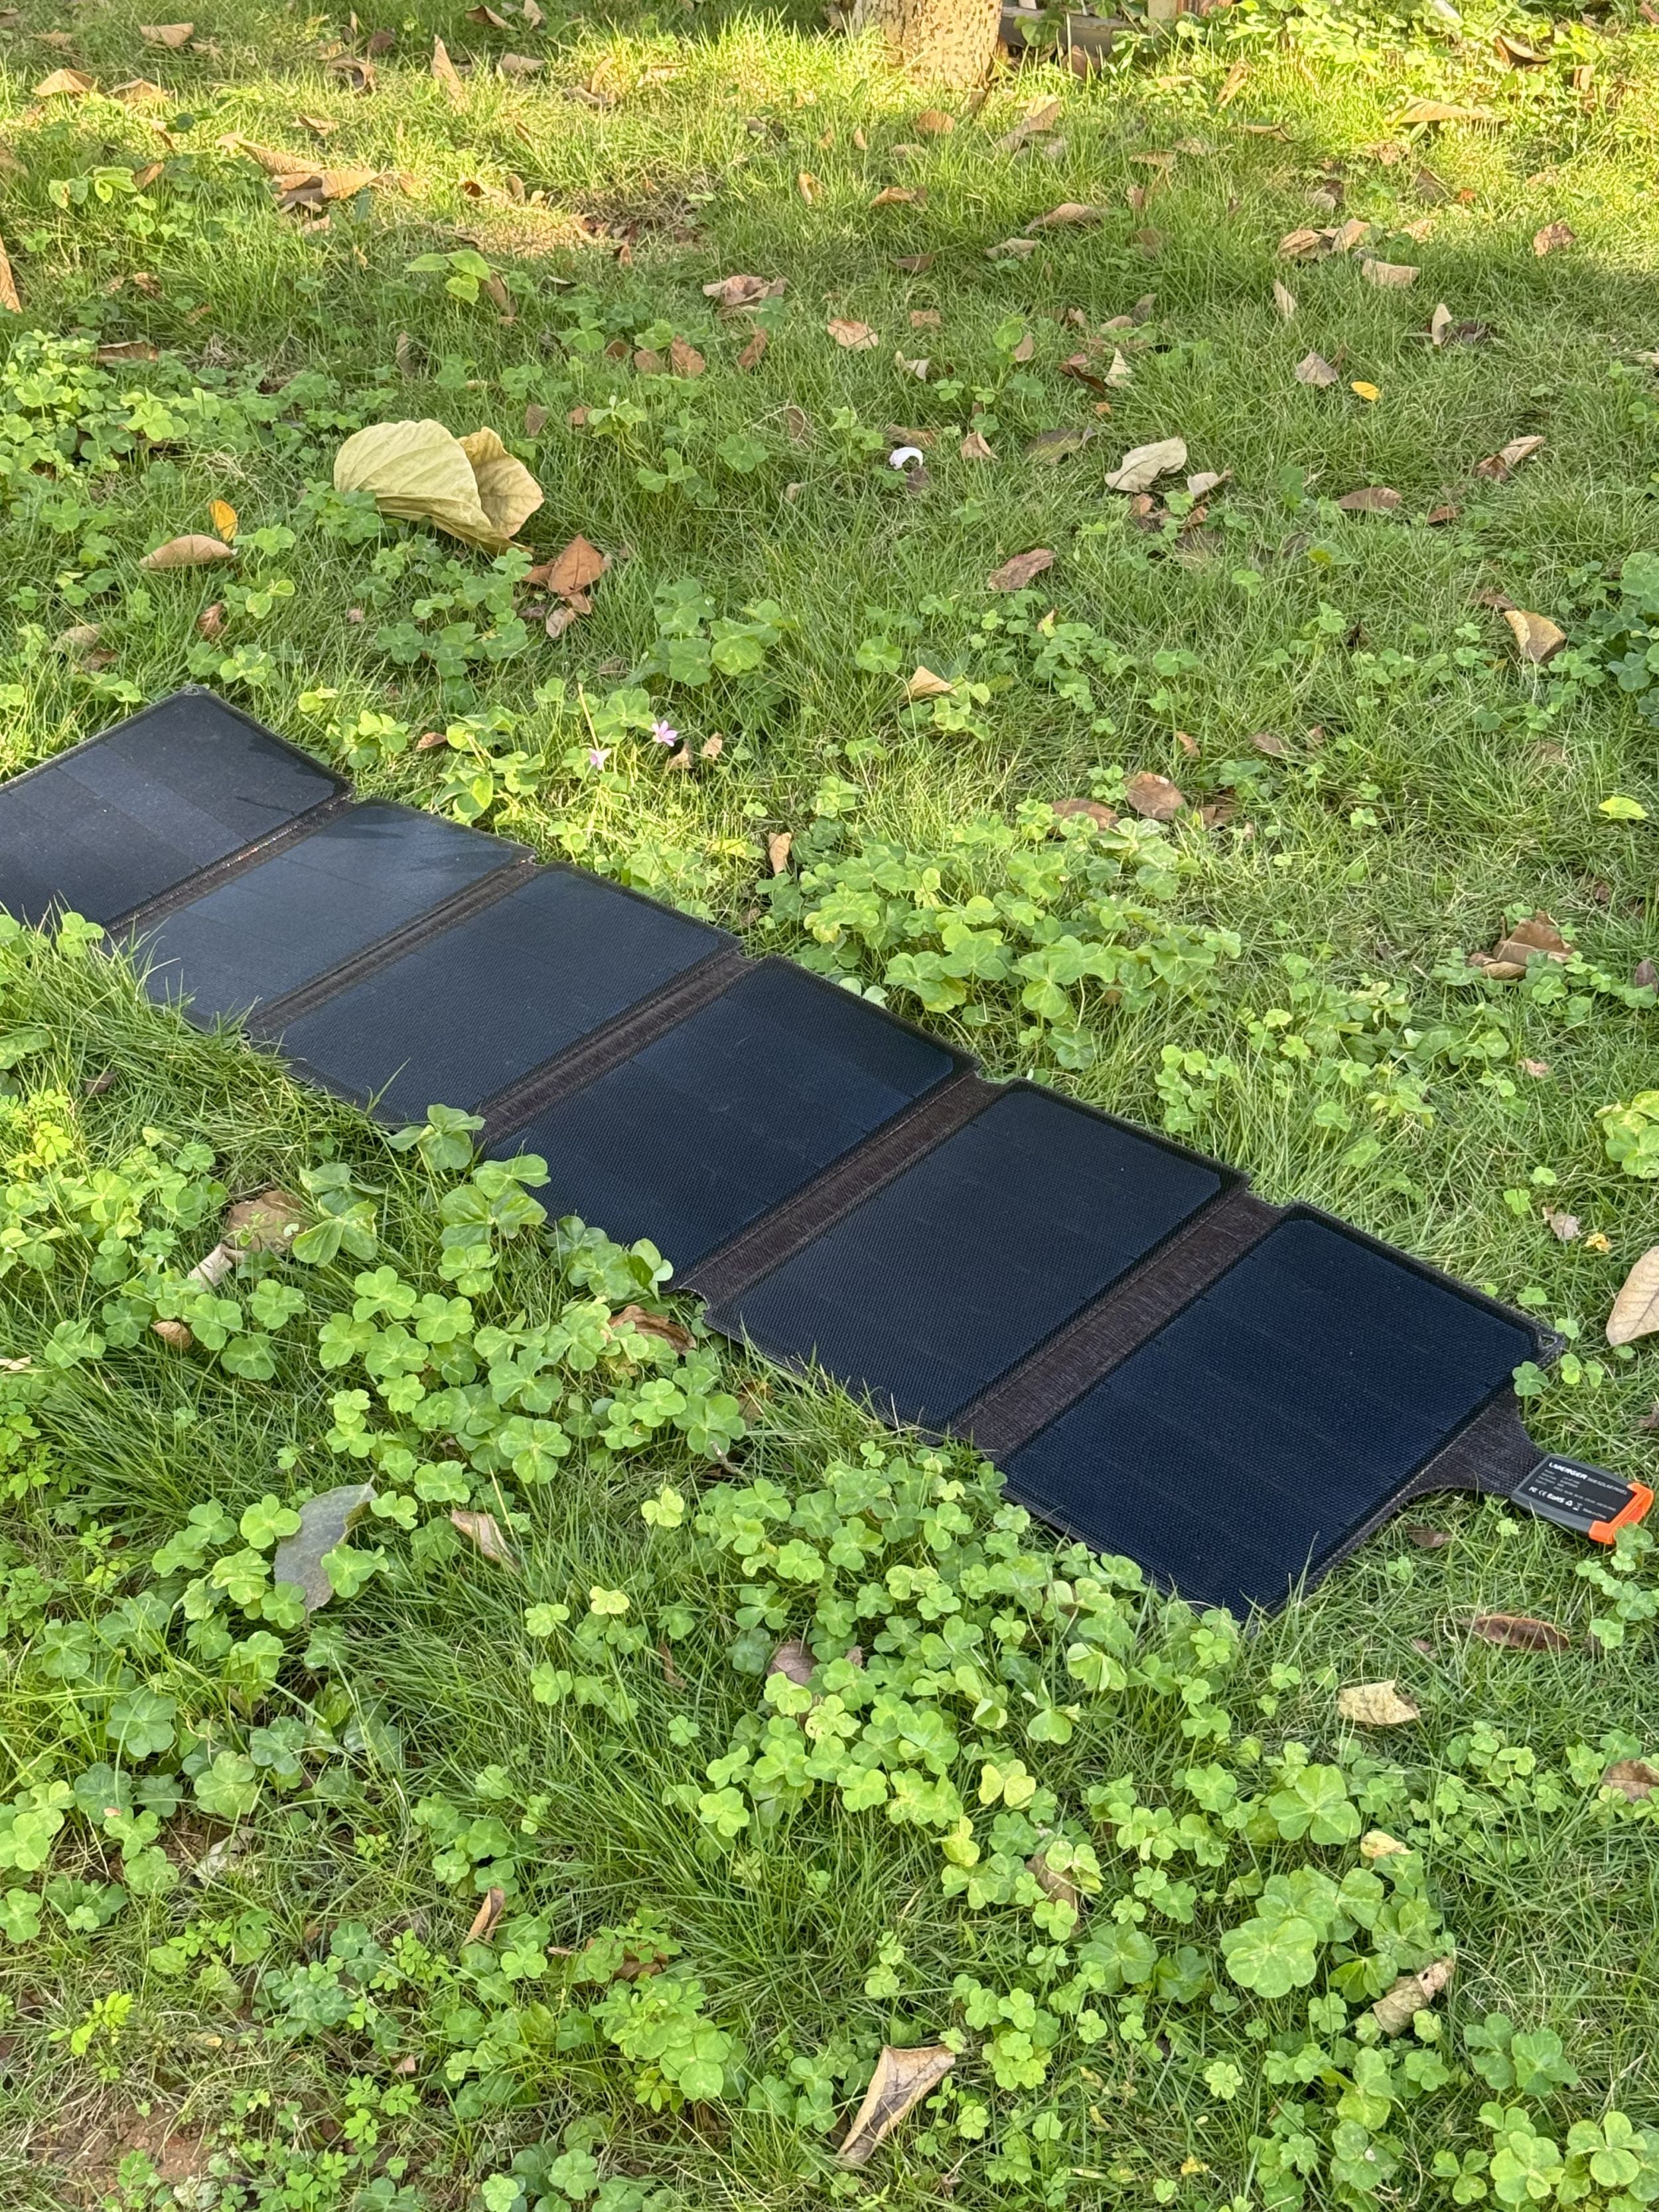 Harness the Power of the Sun with the LMENGER 56W USB Solar Panel